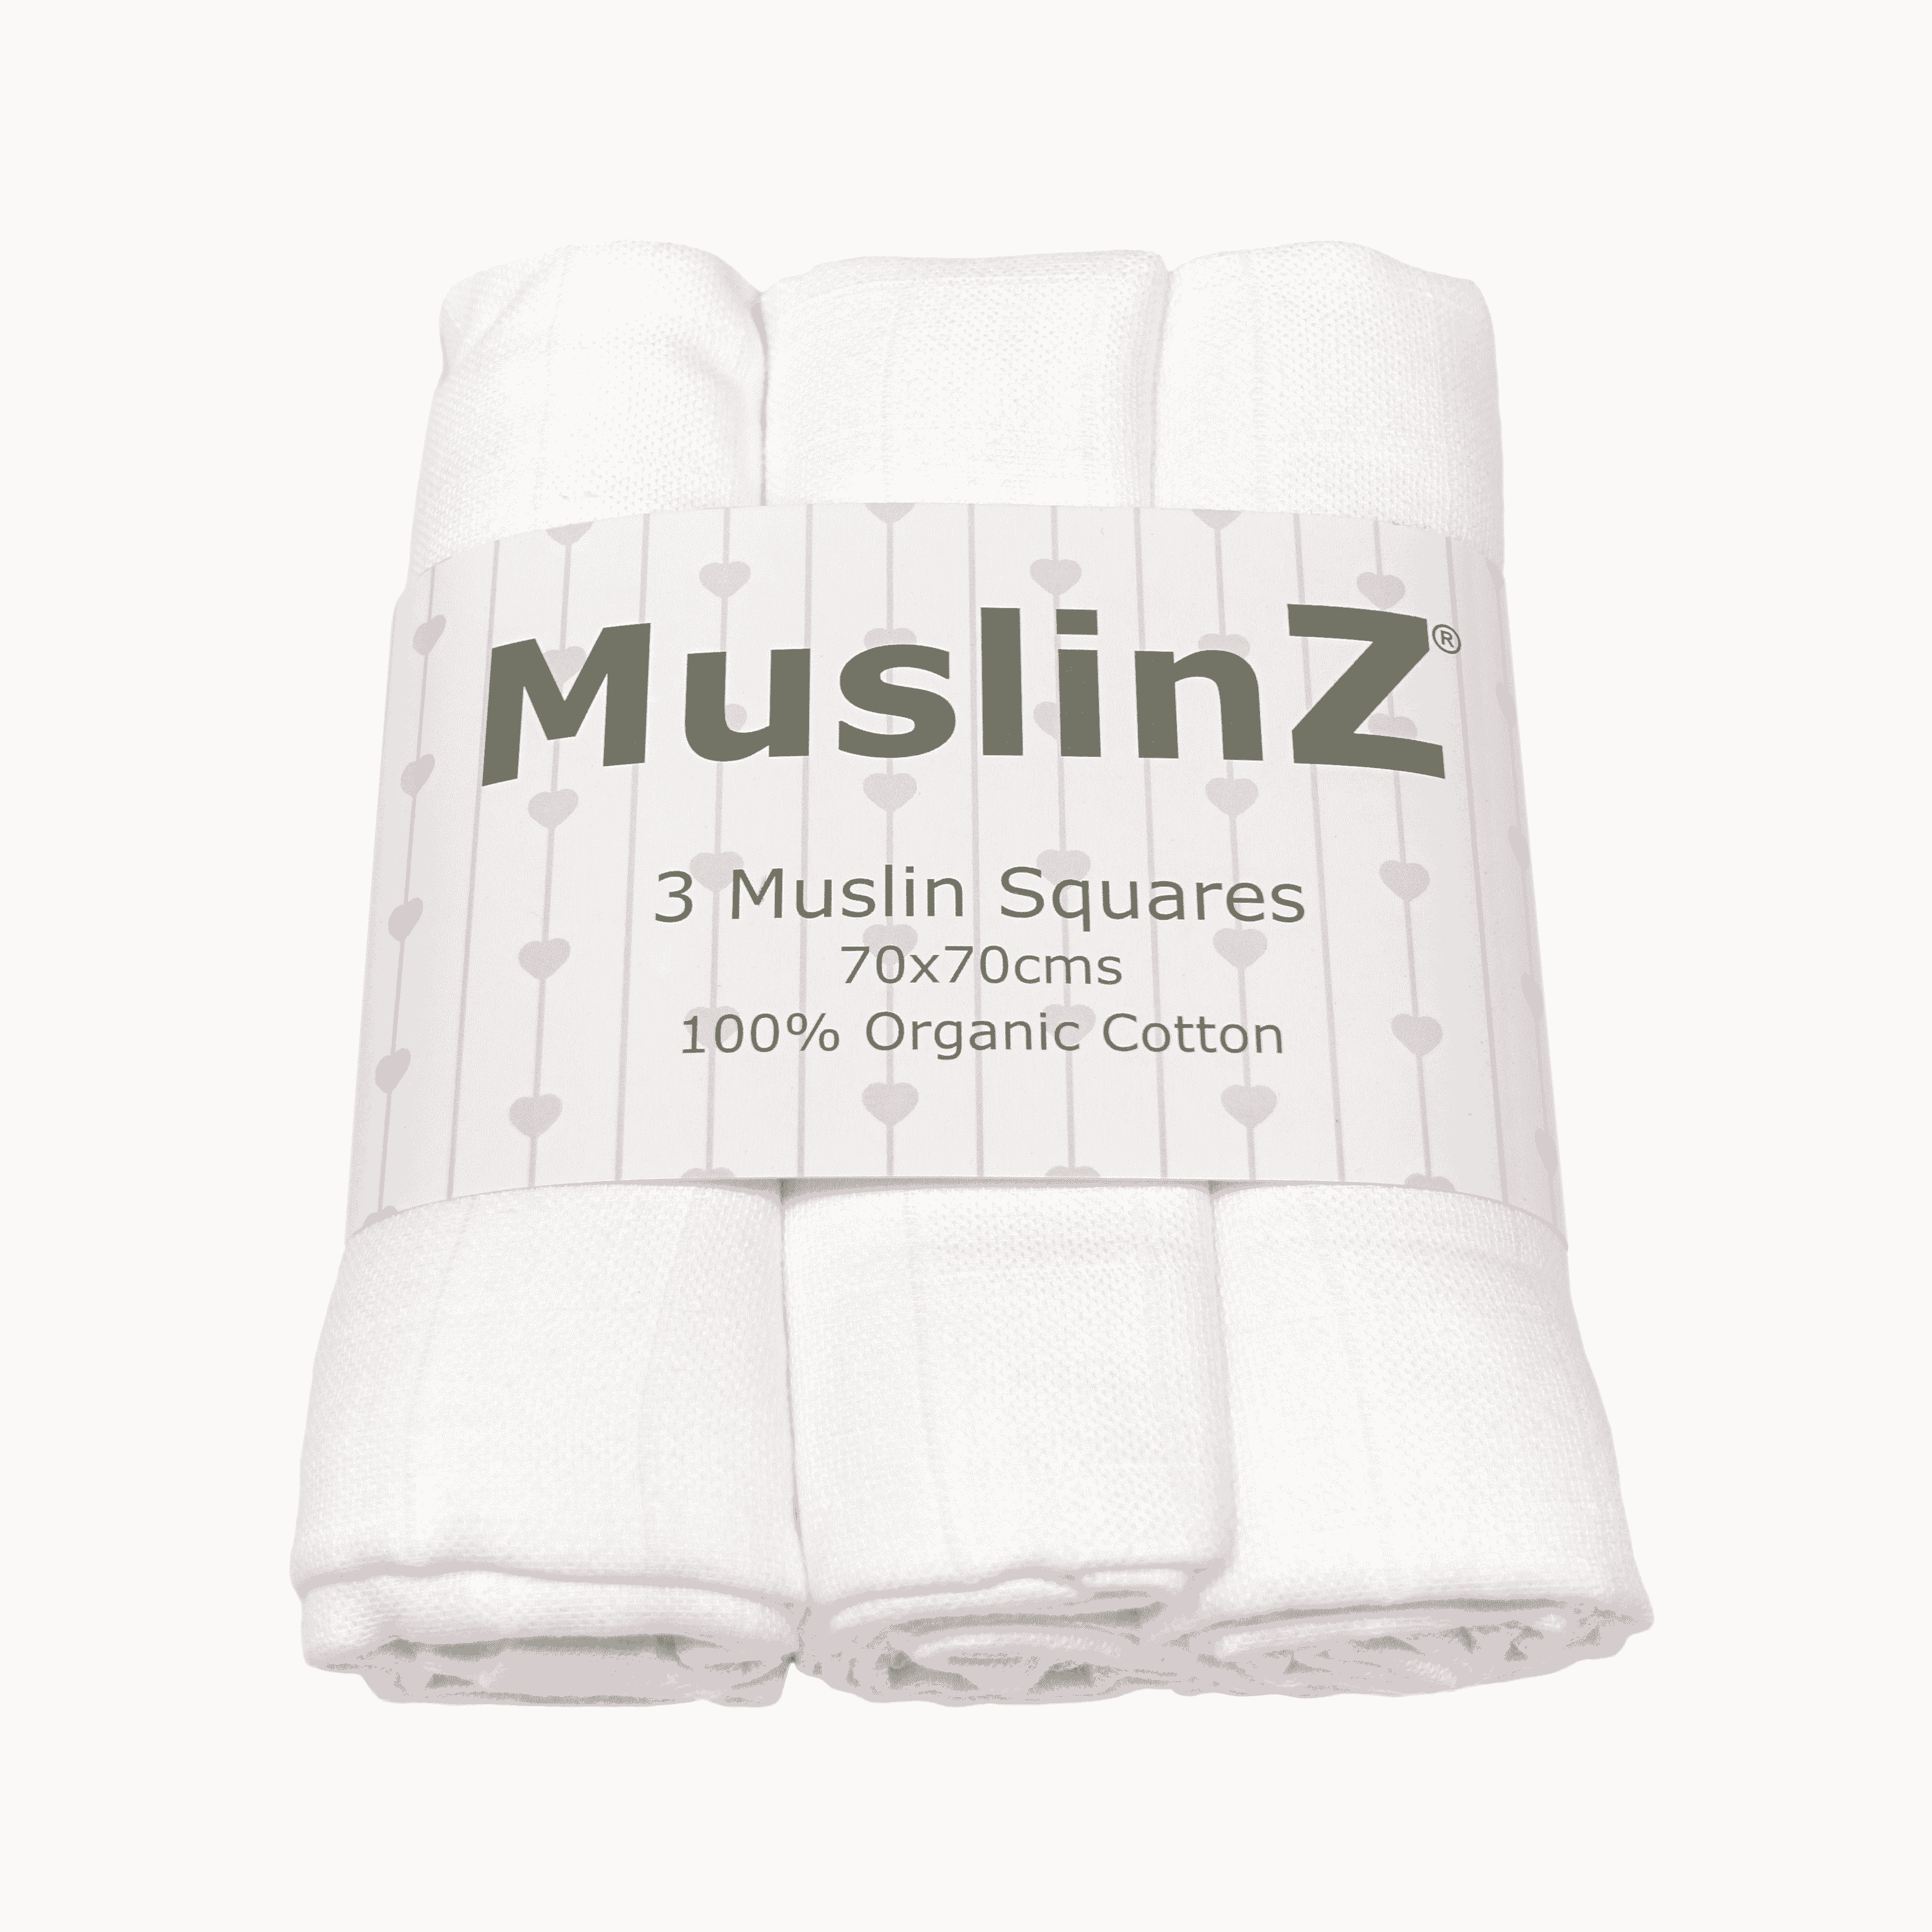 Organic Cotton Muslin Cloths-3 pack included By Muslin Z